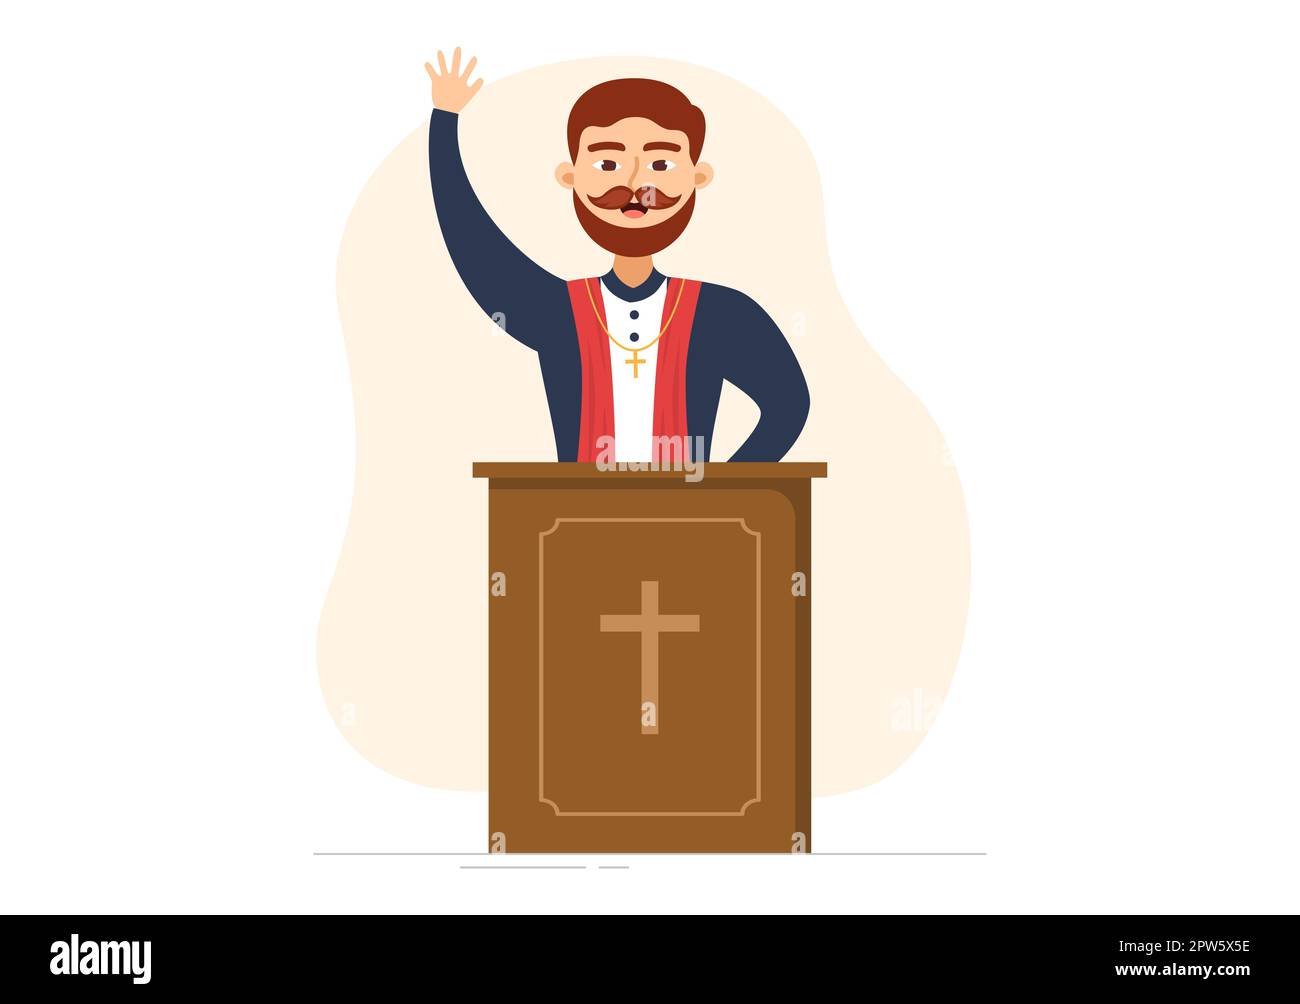 Lutheran Pastor or Protestant Christian Religious Leader Investing in Flat Cute Cartoon Hand Drawn Template Illustration Stock Photo